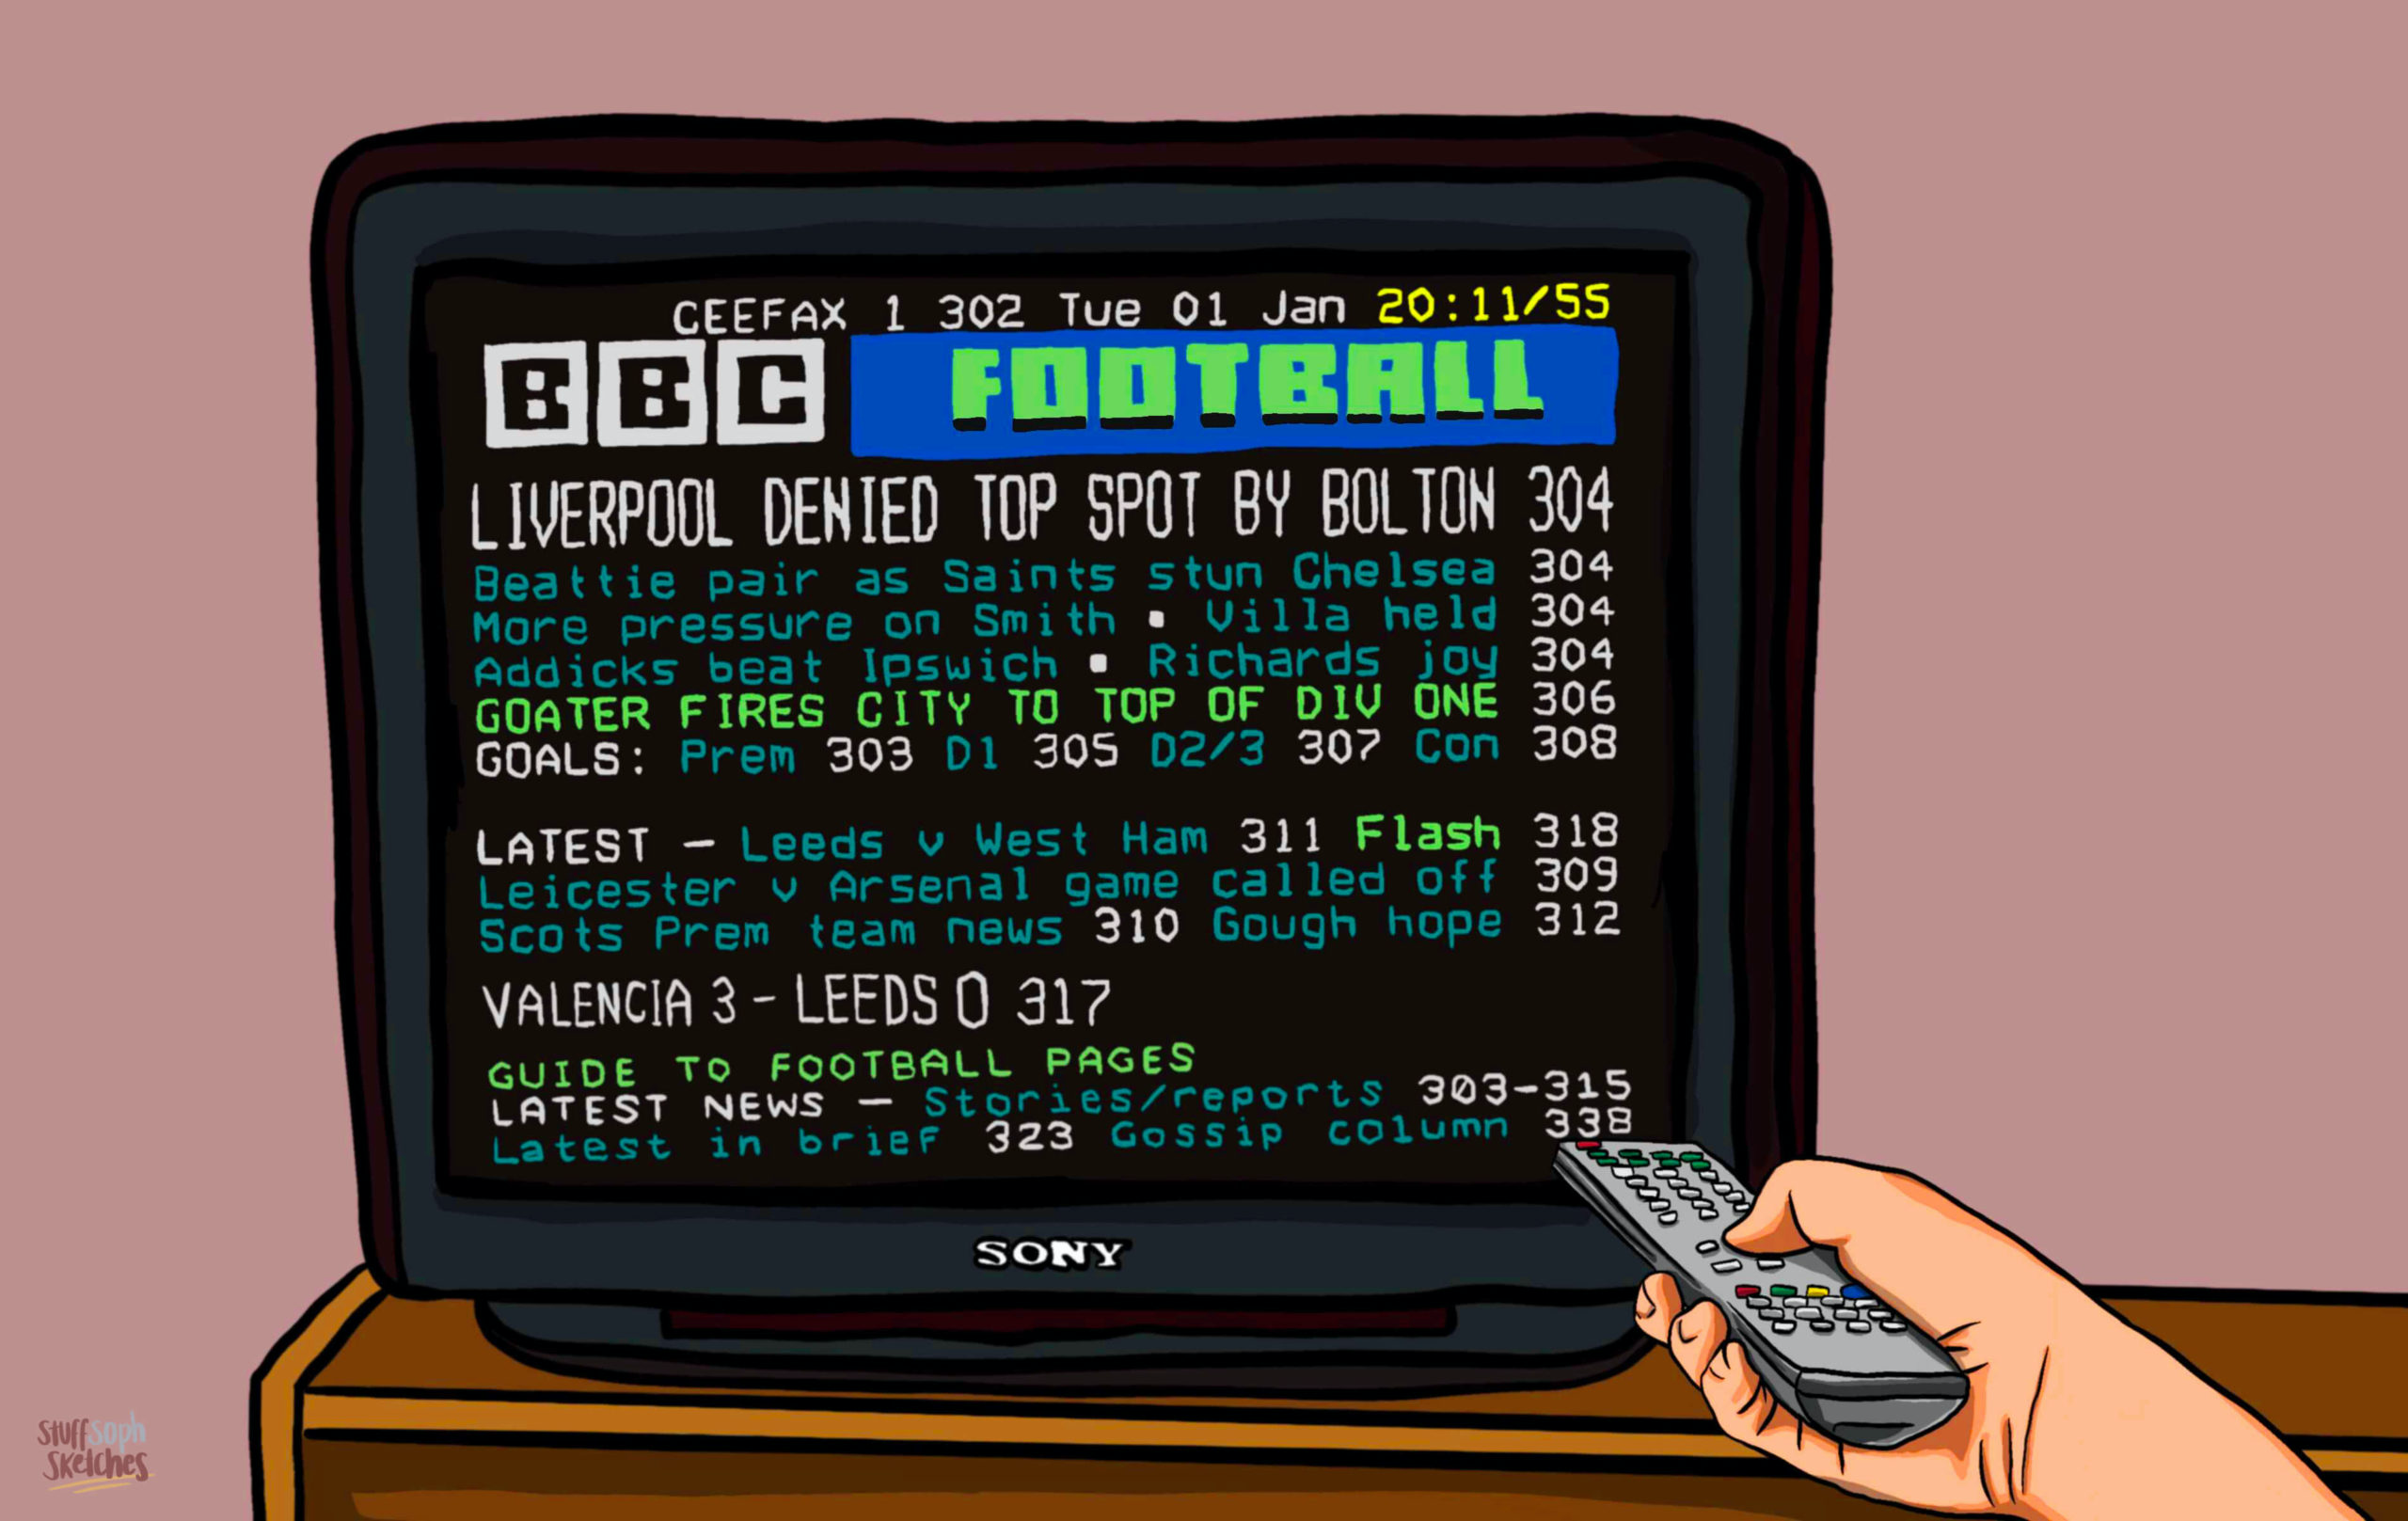 A Sony CRT TV displaying the CEEFAX homepage